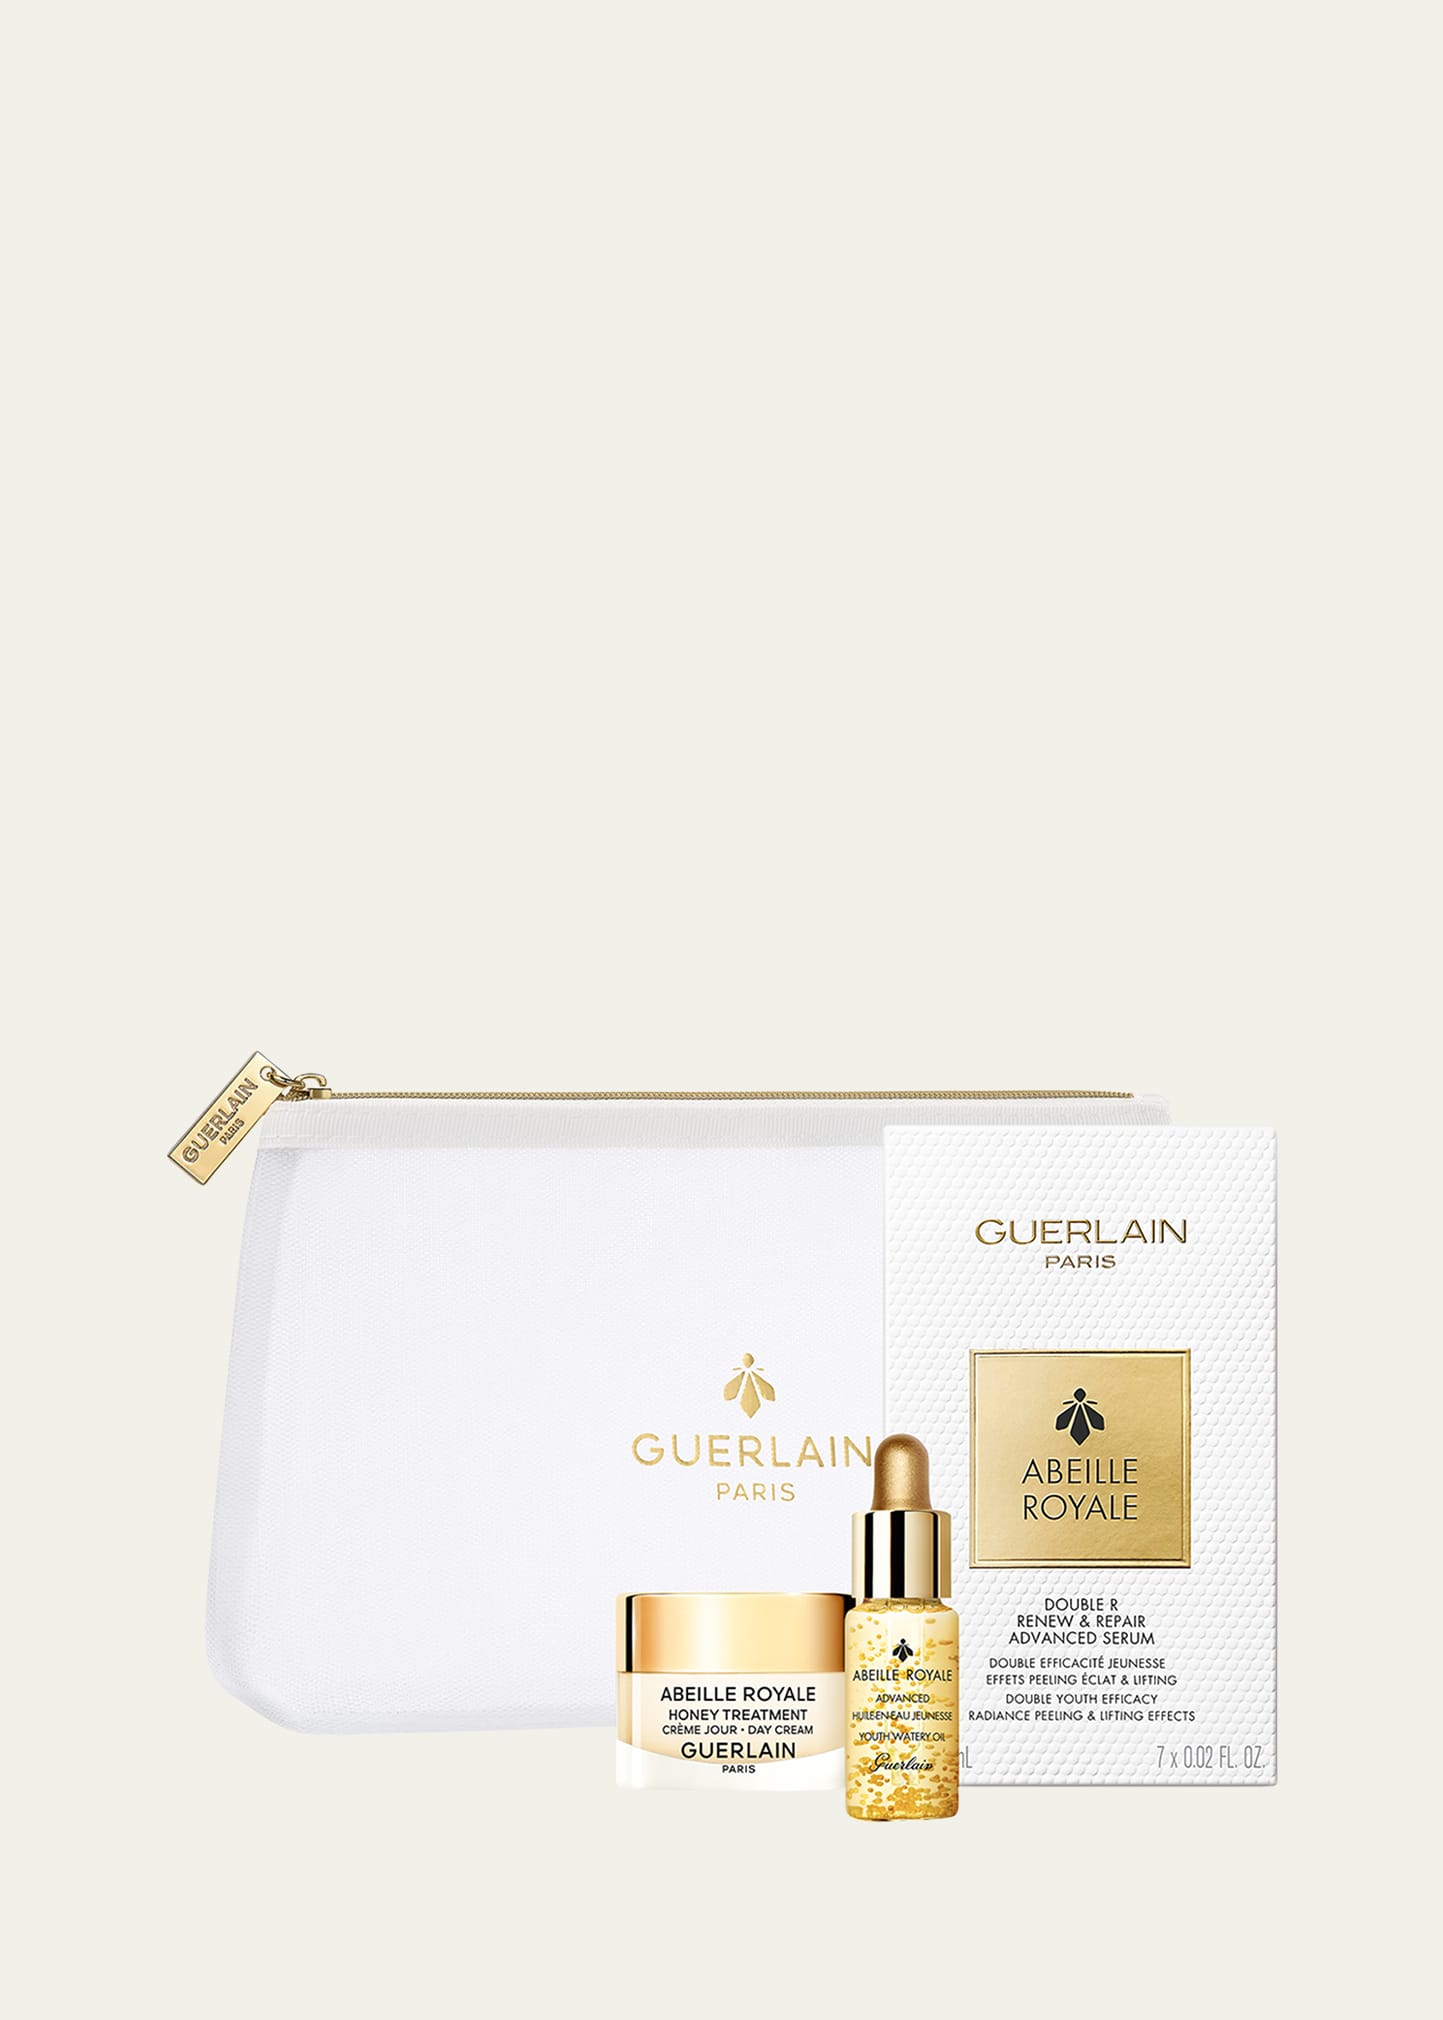 Abeille Royale 4-Piece Gift Set, Yours with any $200 Guerlain Purchase